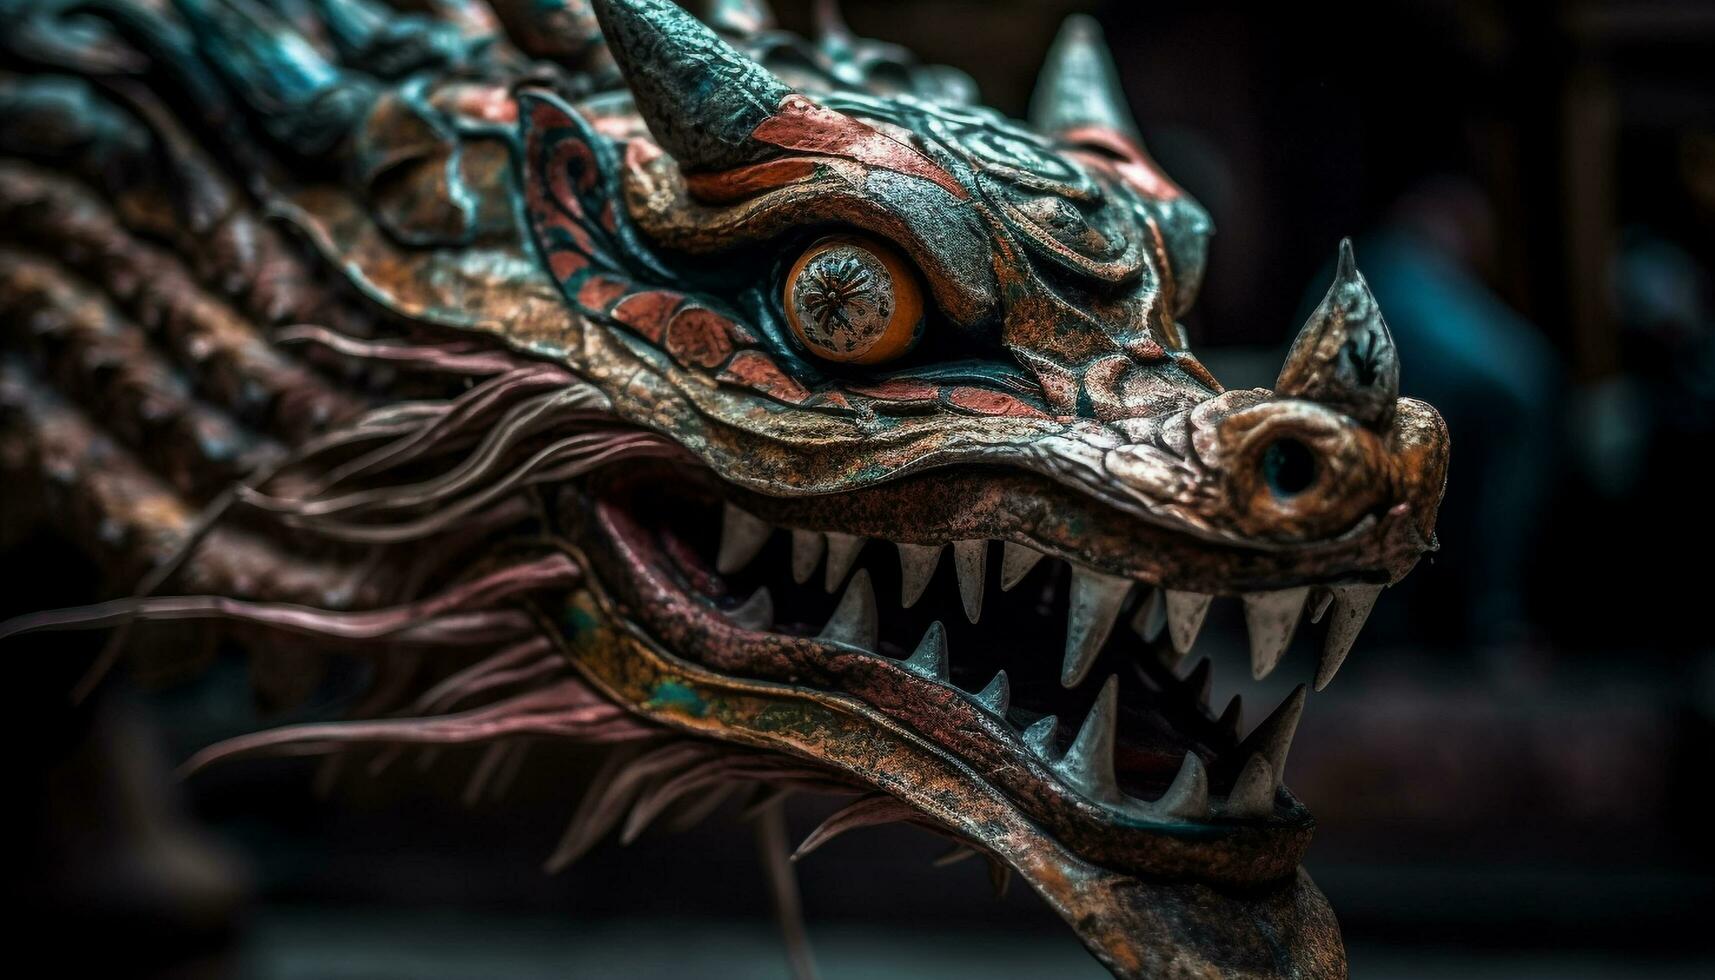 The ancient Chinese dragon sculpture symbolizes spirituality and indigenous culture generated by AI photo